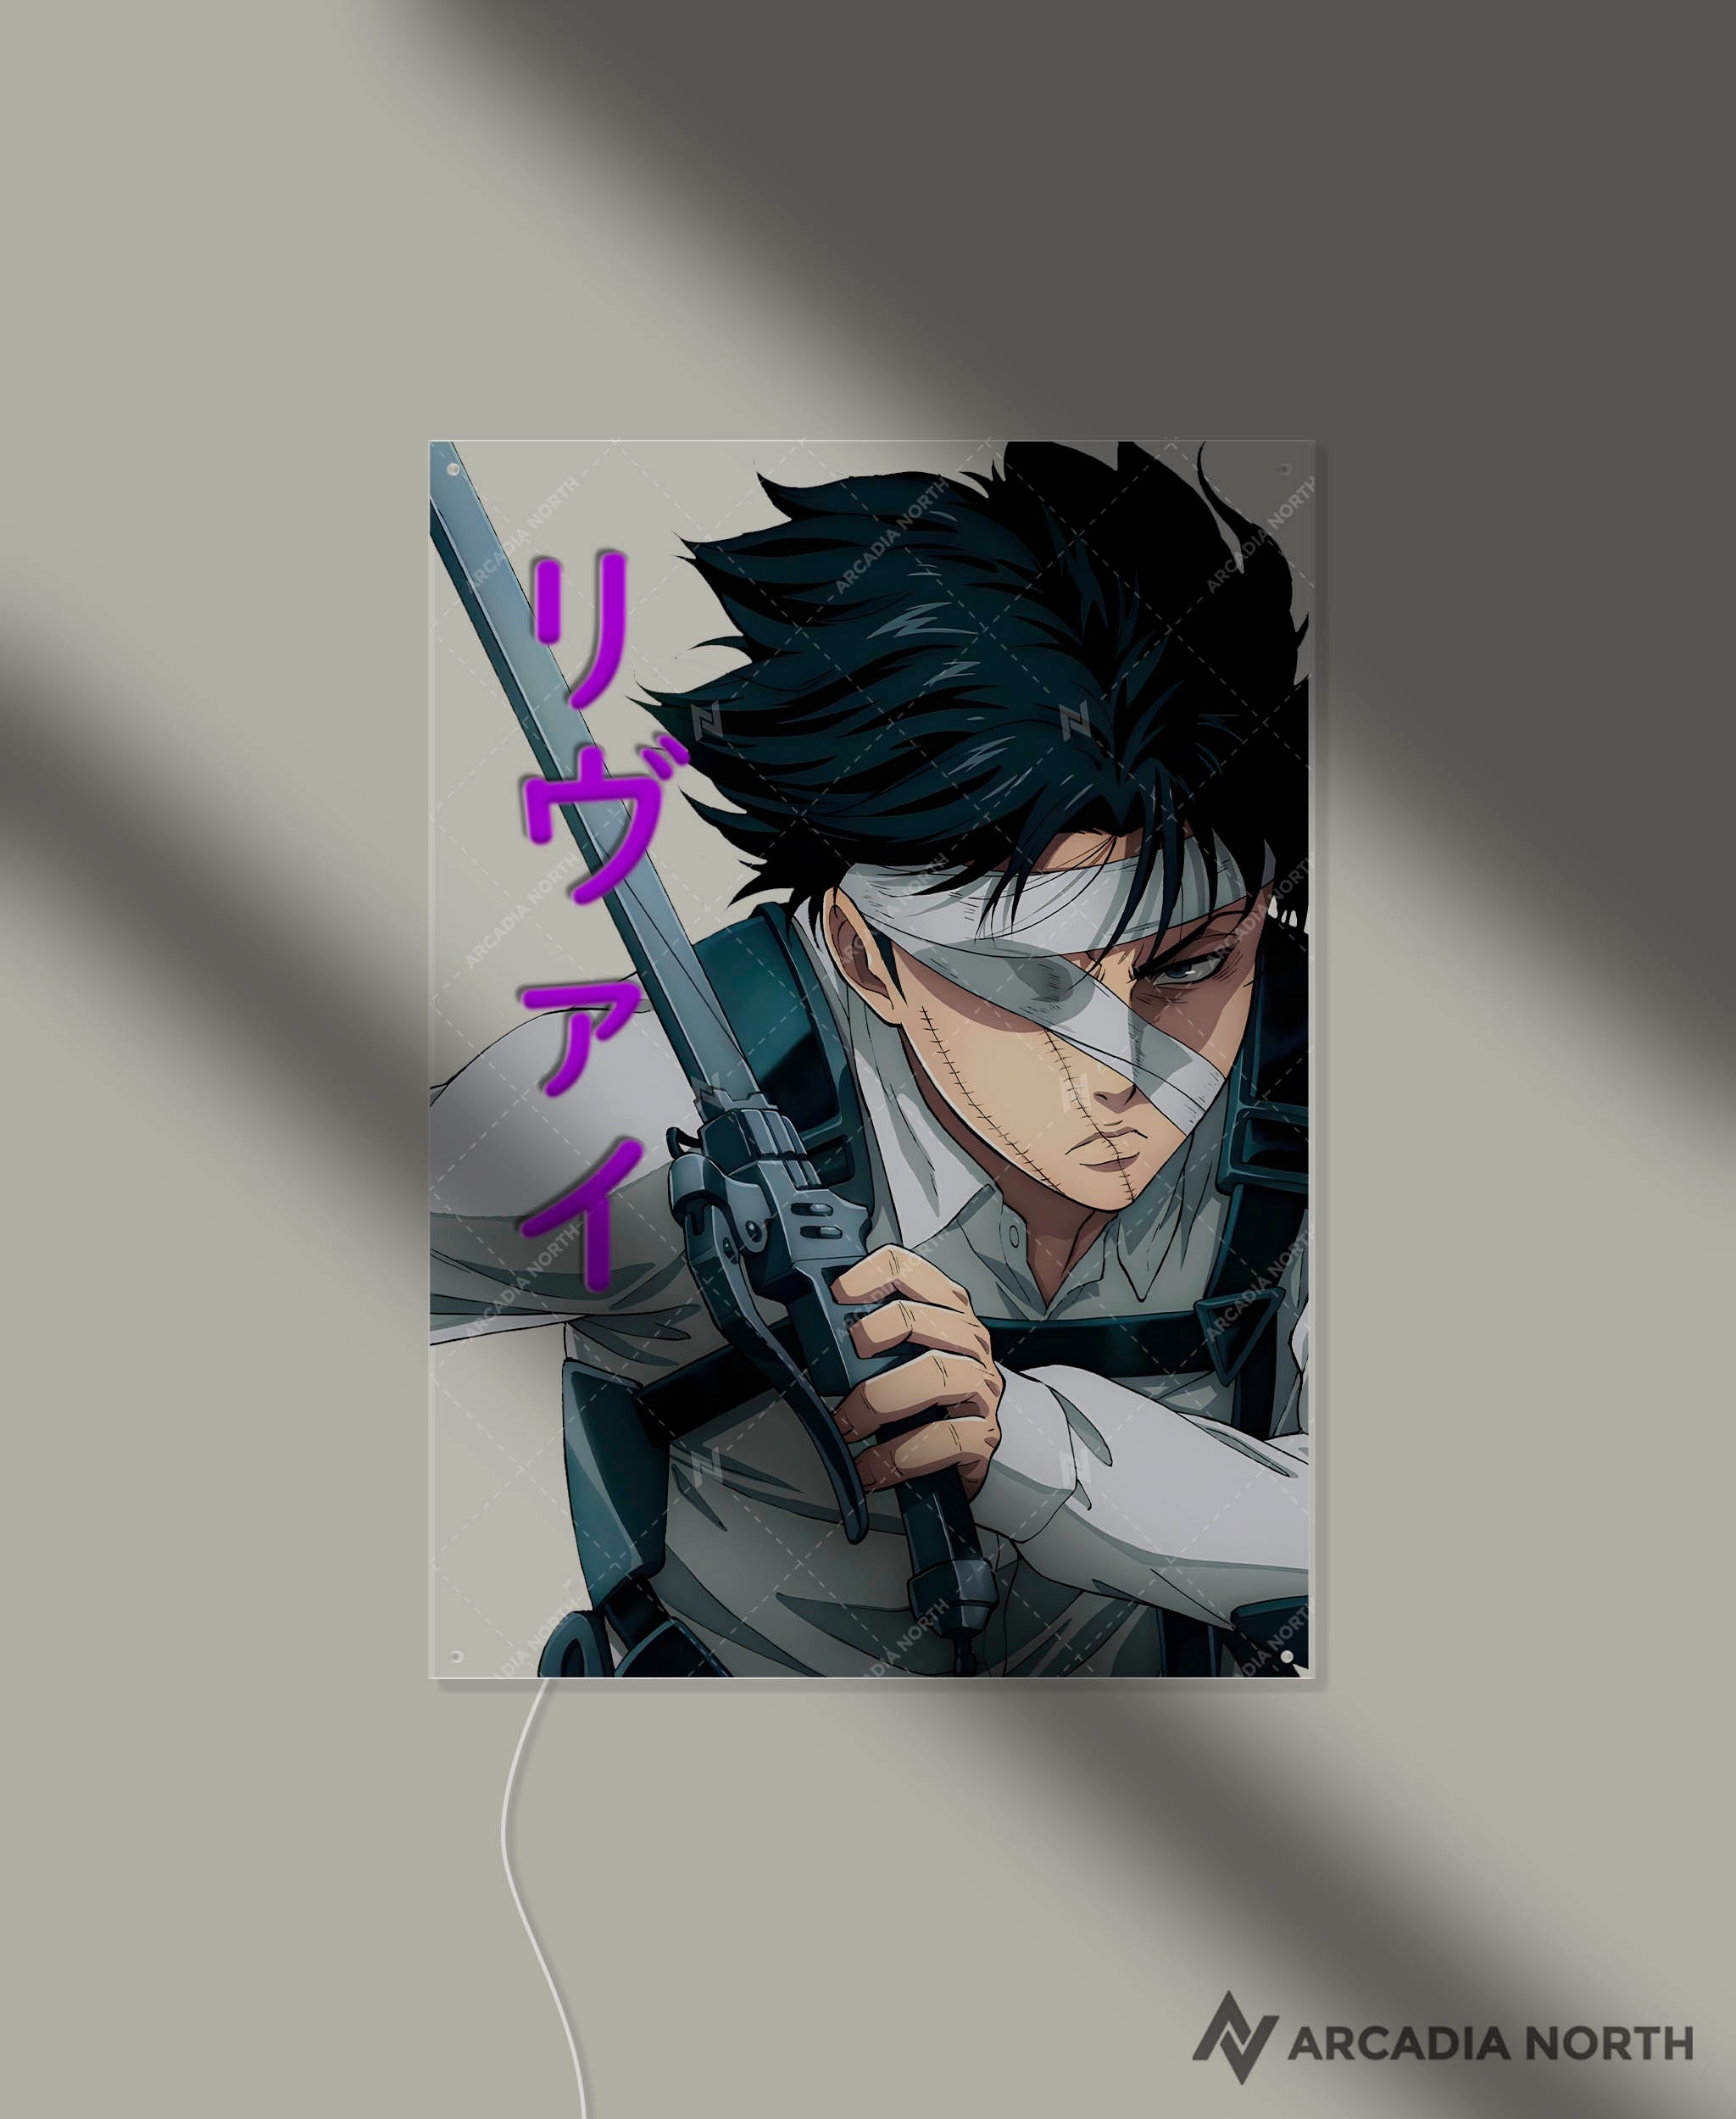 Arcadia North AURALIGHT - an LED Poster featuring the anime Attack on Titan with Levi Ackerman. Levi is written in Japanese Kana and illuminated by glowing neon LED lights. UV-printed on acrylic.